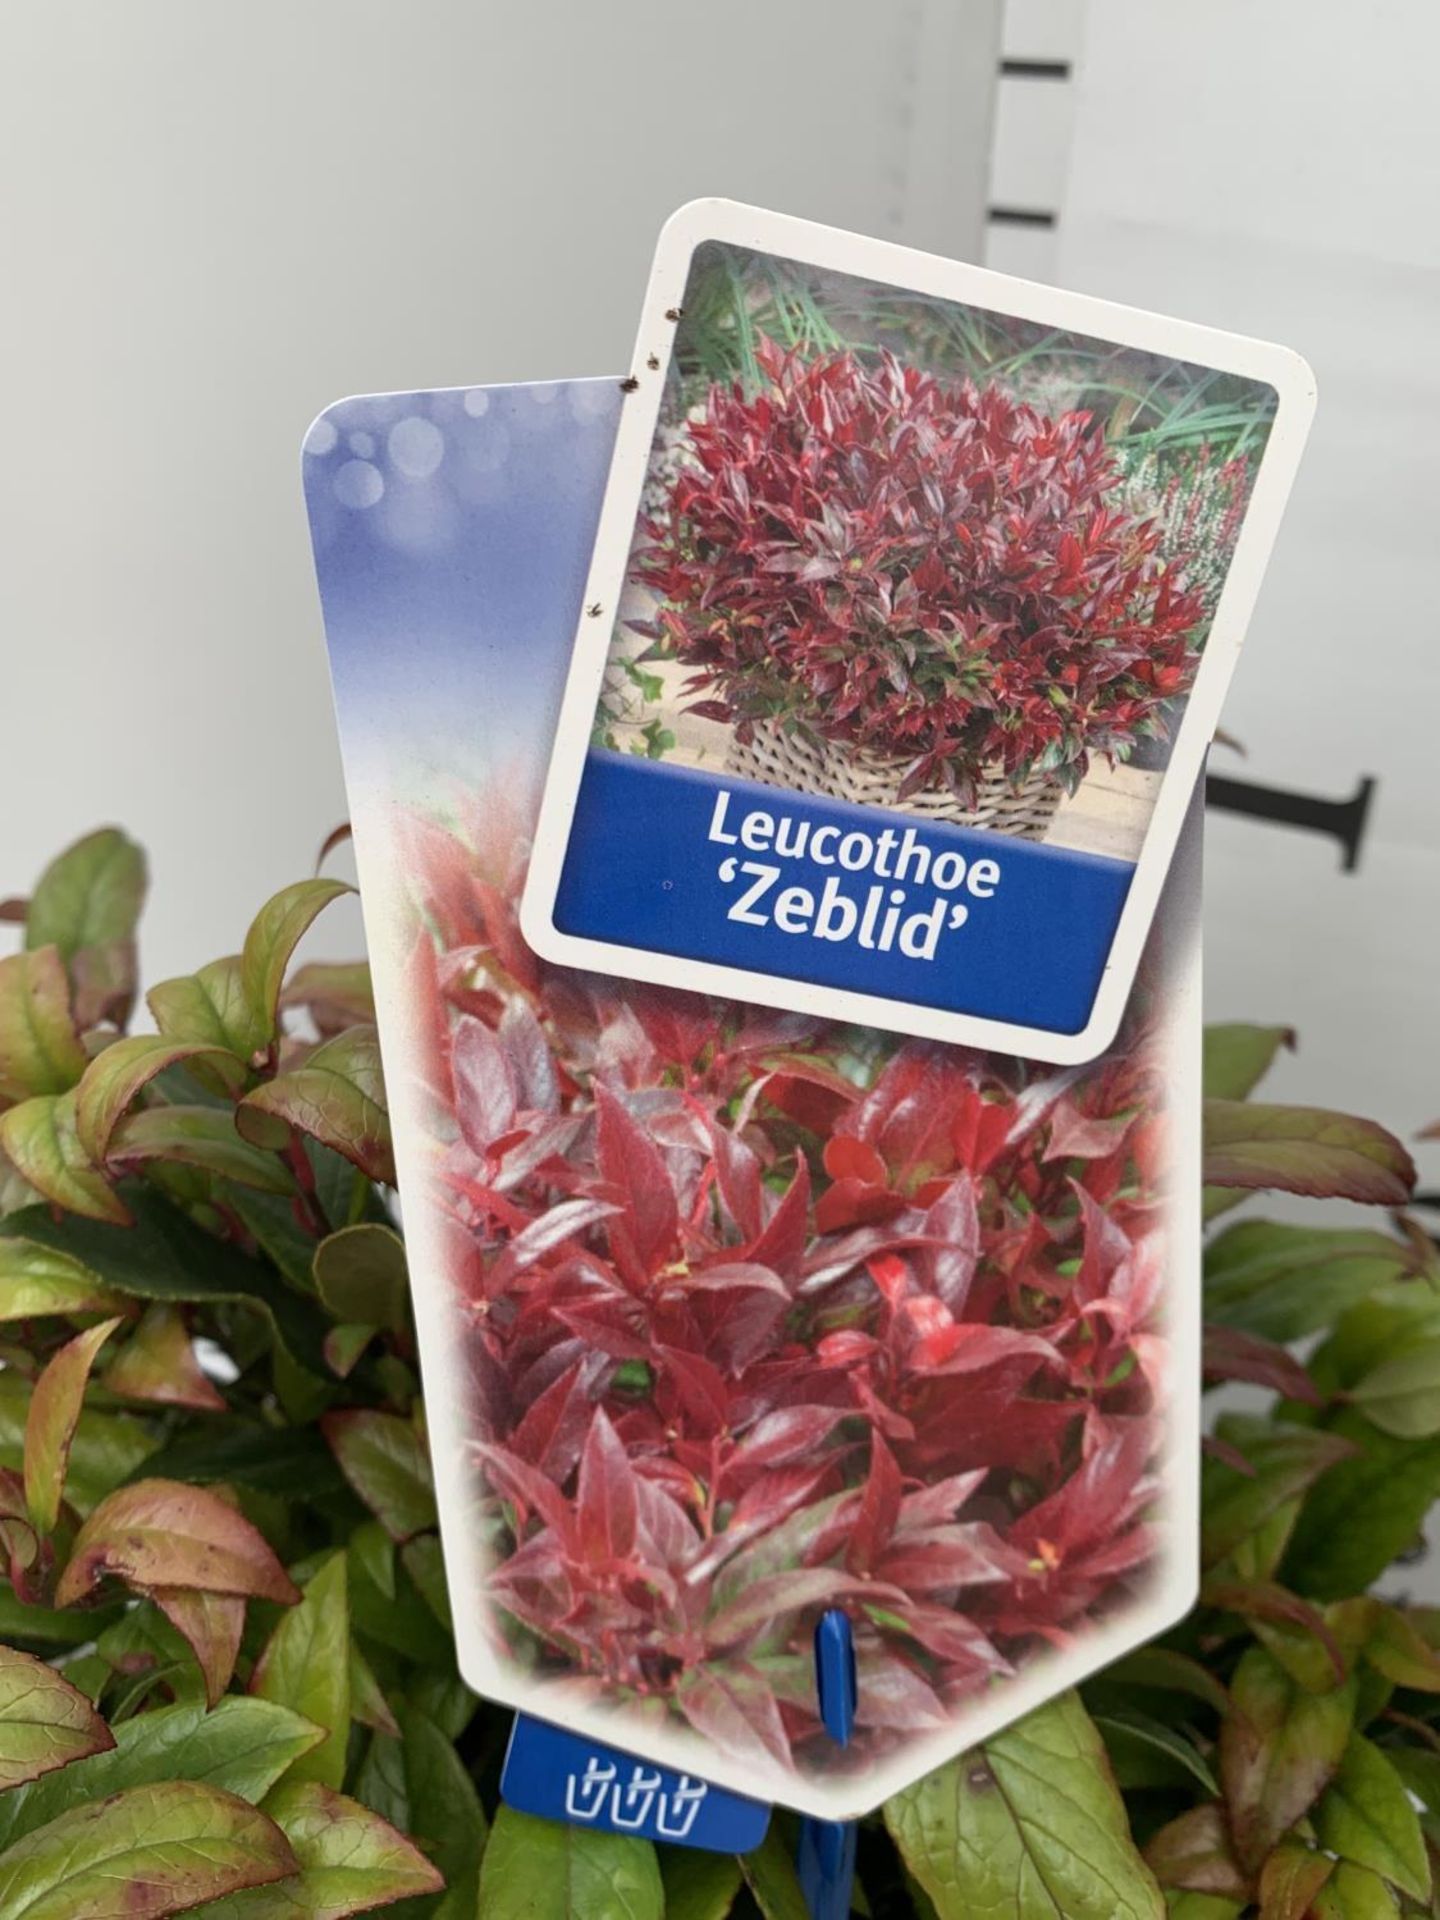 TWO LEUCOTHOE ZEBLID IN 2 LTR POTS 35CM TALL PLUS VAT TO BE SOLD FOR THE TWO - Image 7 of 8